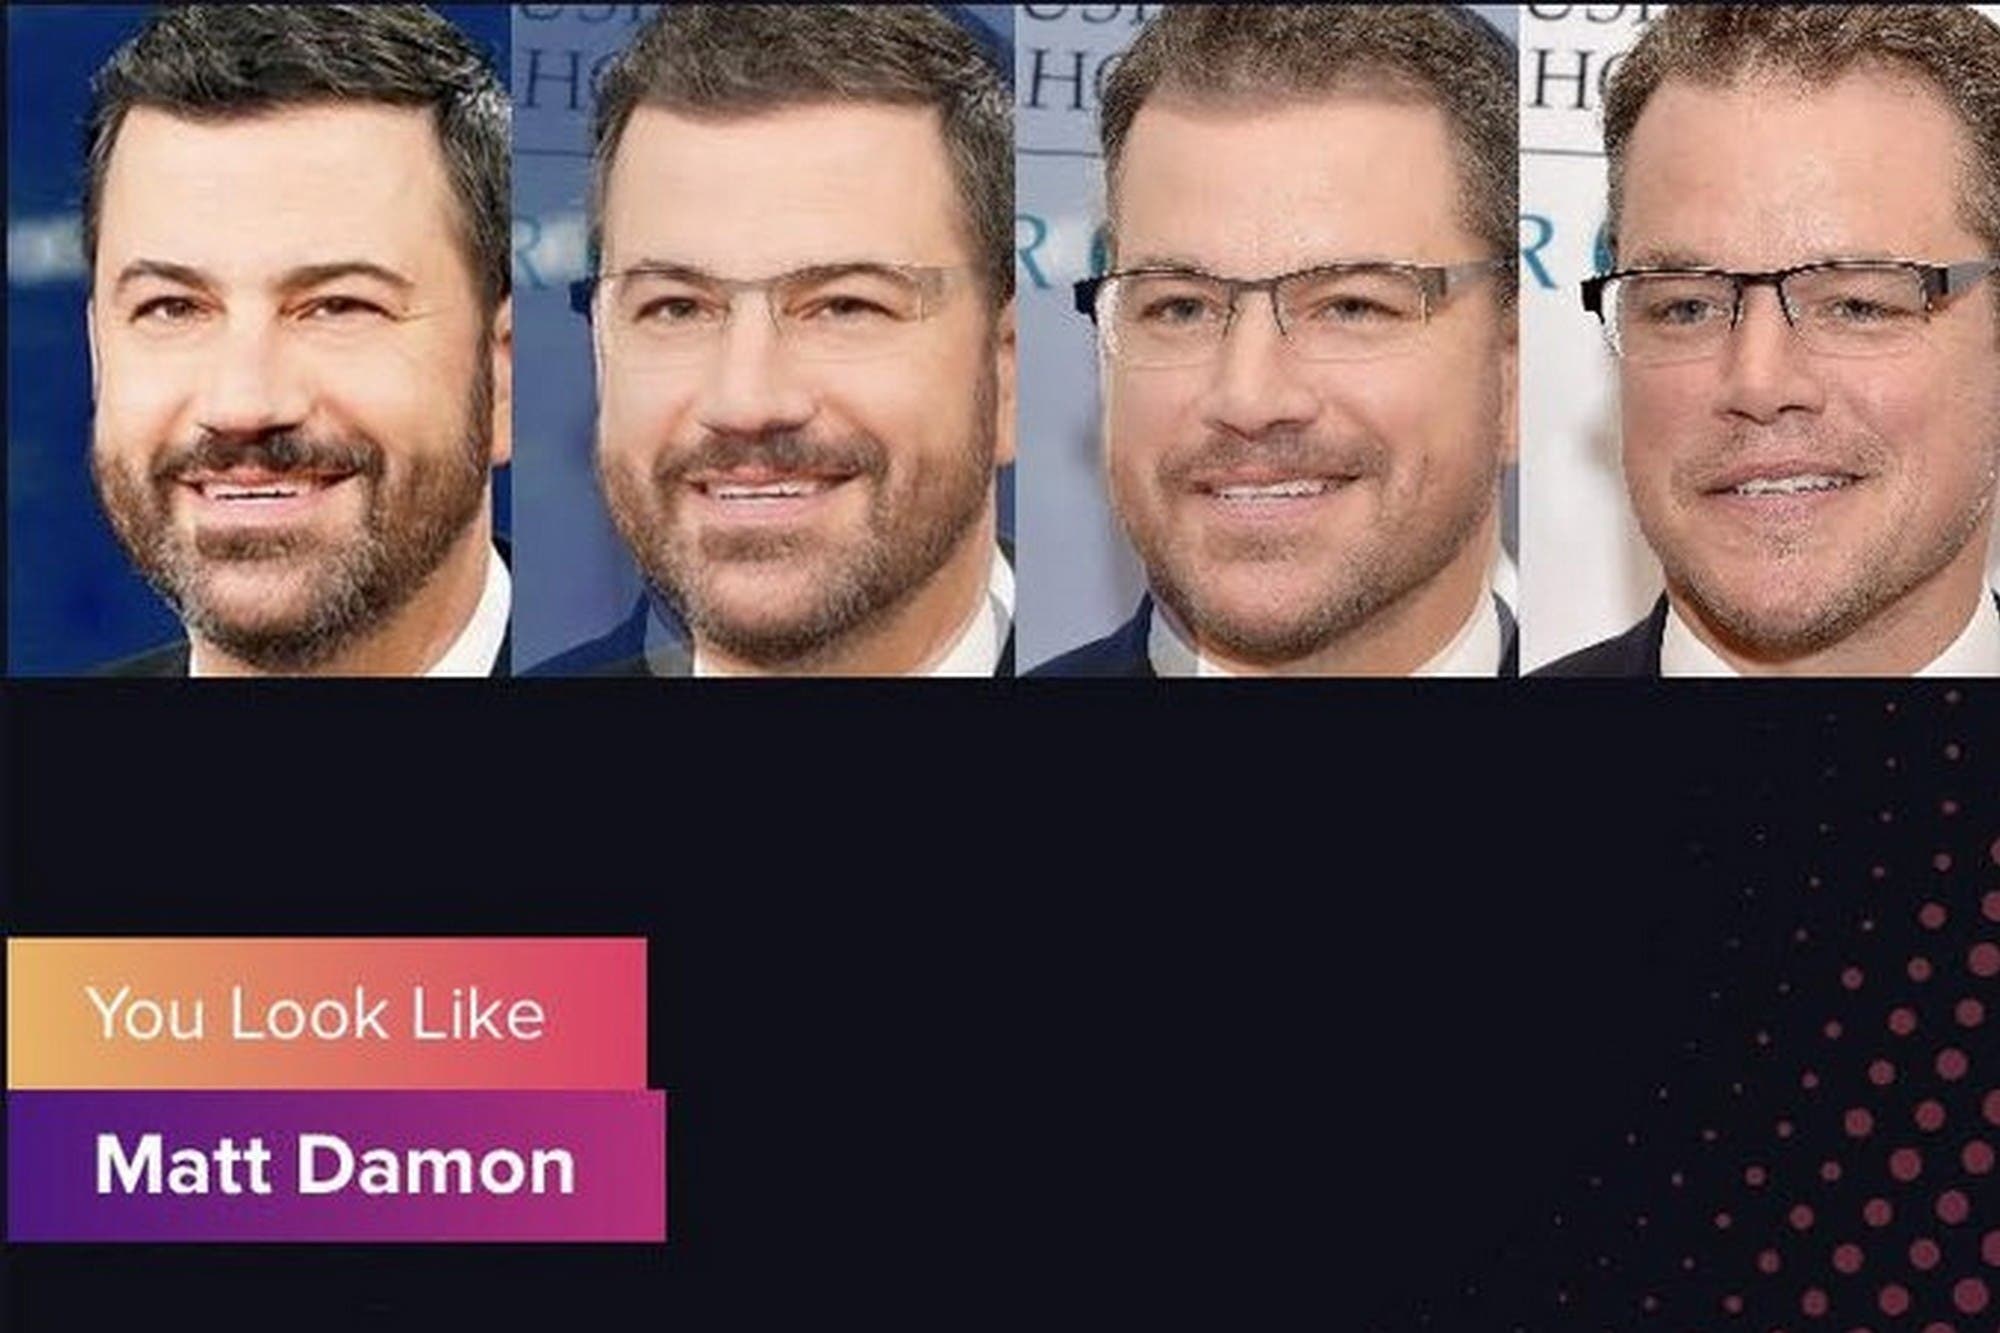 This is Gradient, the app that tells you what your face looks like